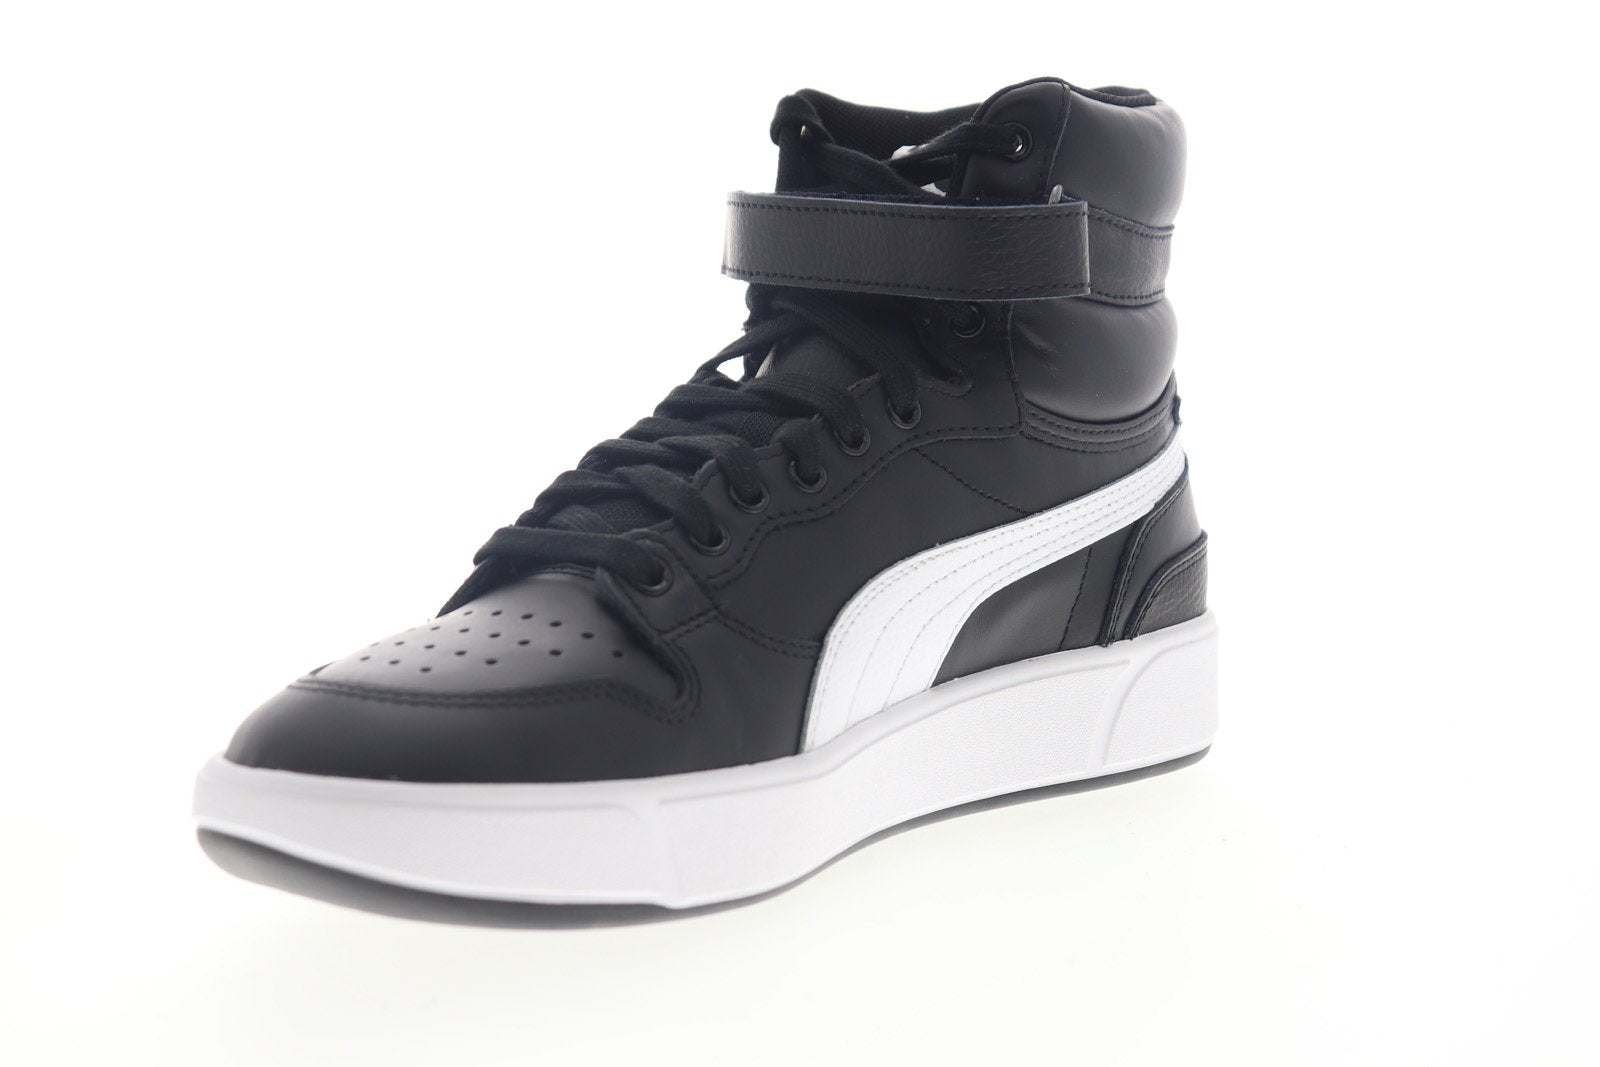 Puma Sky LX Mid Athletic 37287403 Mens Black High Top Sneakers Shoes ...